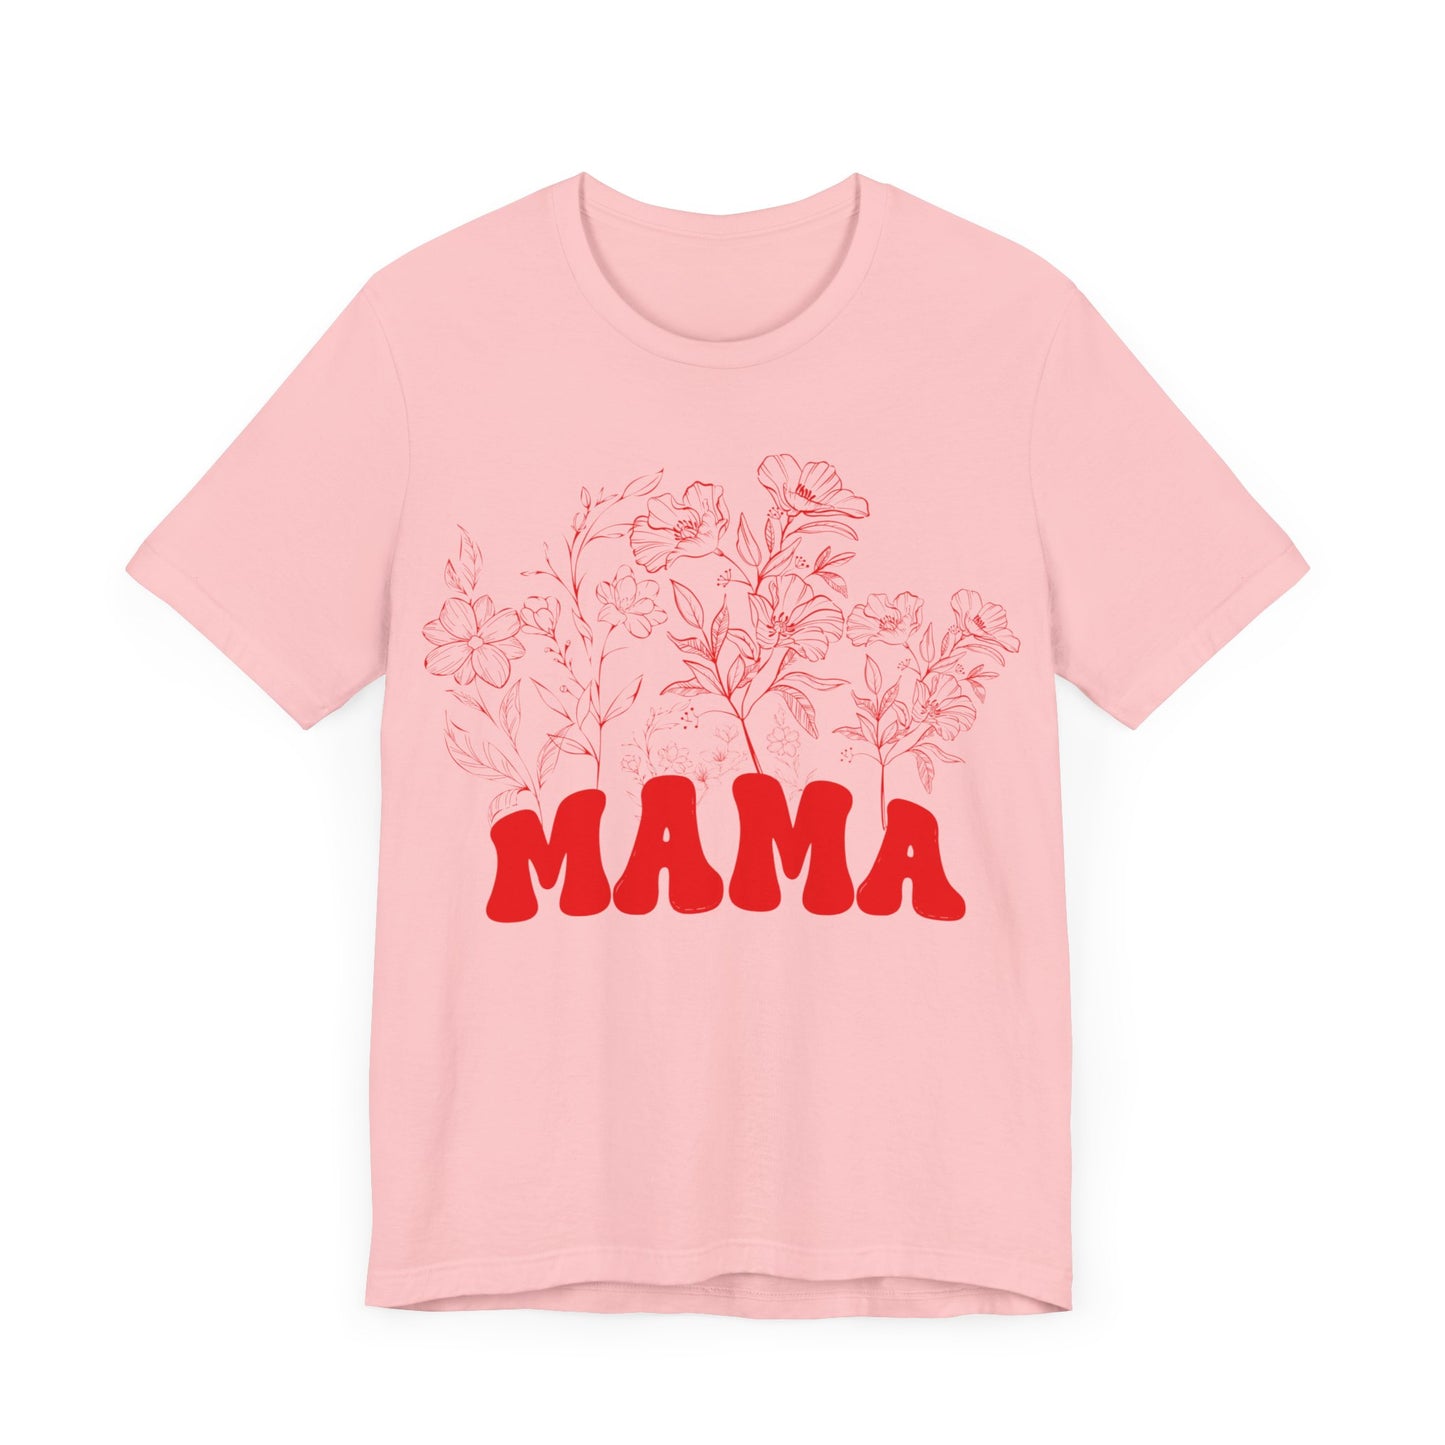 Wildflowers Mama Shirt, Mama Shirt, Retro Mom TShirt, Mother's Day Gift, Flower Shirts for Women, Floral New Mom Gift, T1592